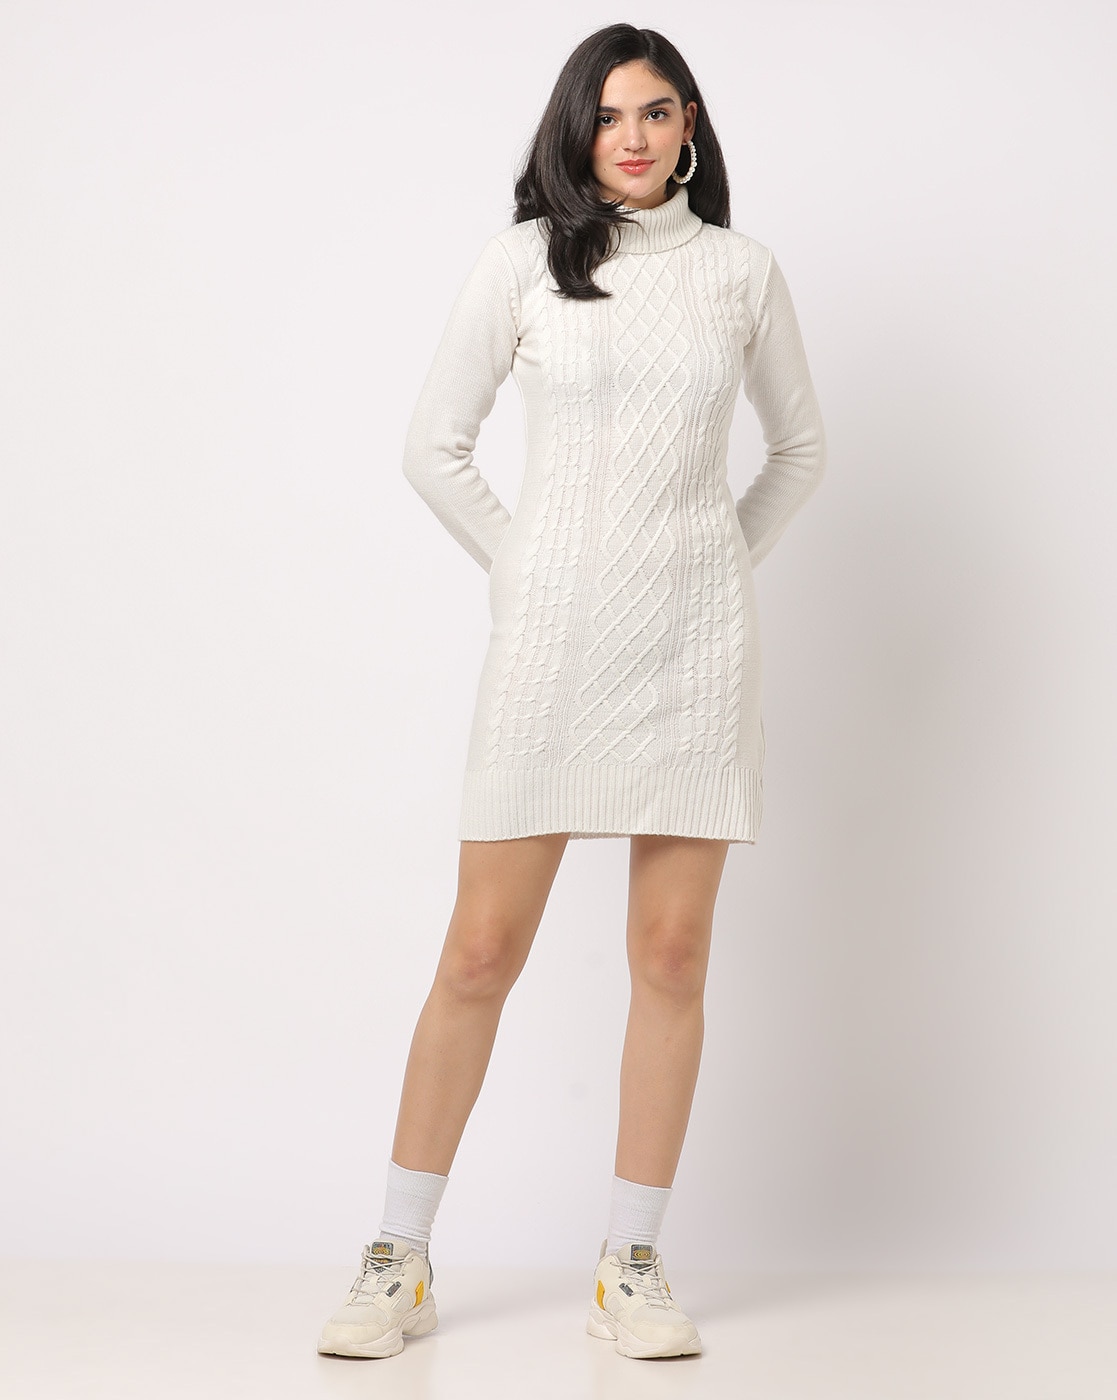 Sexy young female wearing a white sweater dress with black long boots Stock  Photo by wirestock